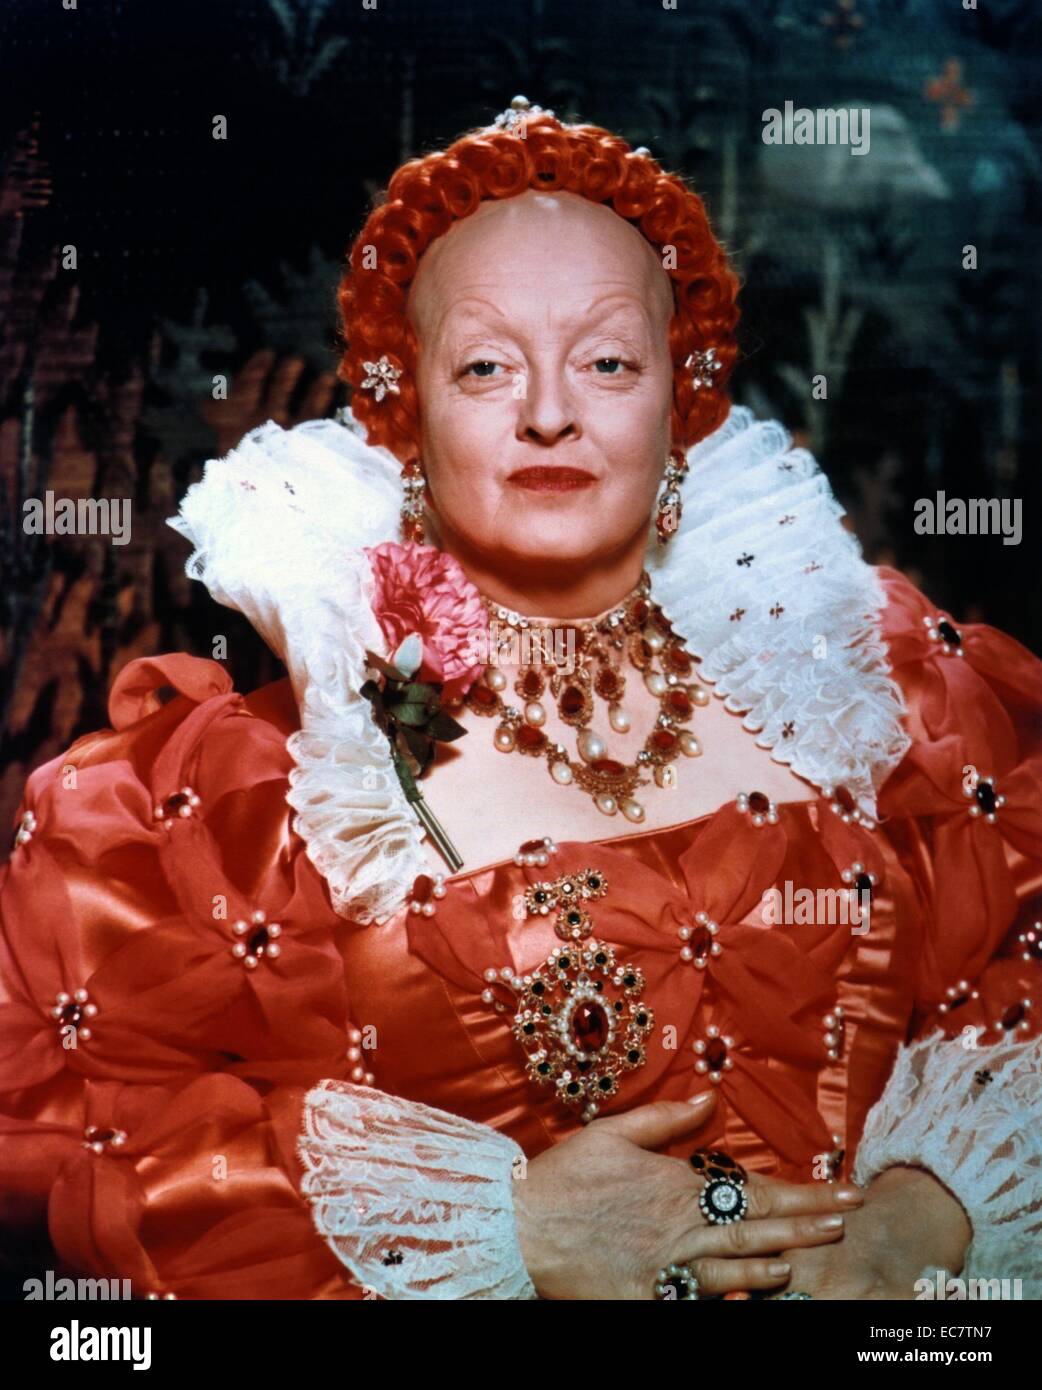 The Virgin Queen is a 1955 historical drama film starring Bette Davis, Richard Todd and Joan Collins. It focuses on the relationship between Elizabeth I of England and Sir Walter Raleigh. The film marks the second time Davis played the British monarch. Stock Photo